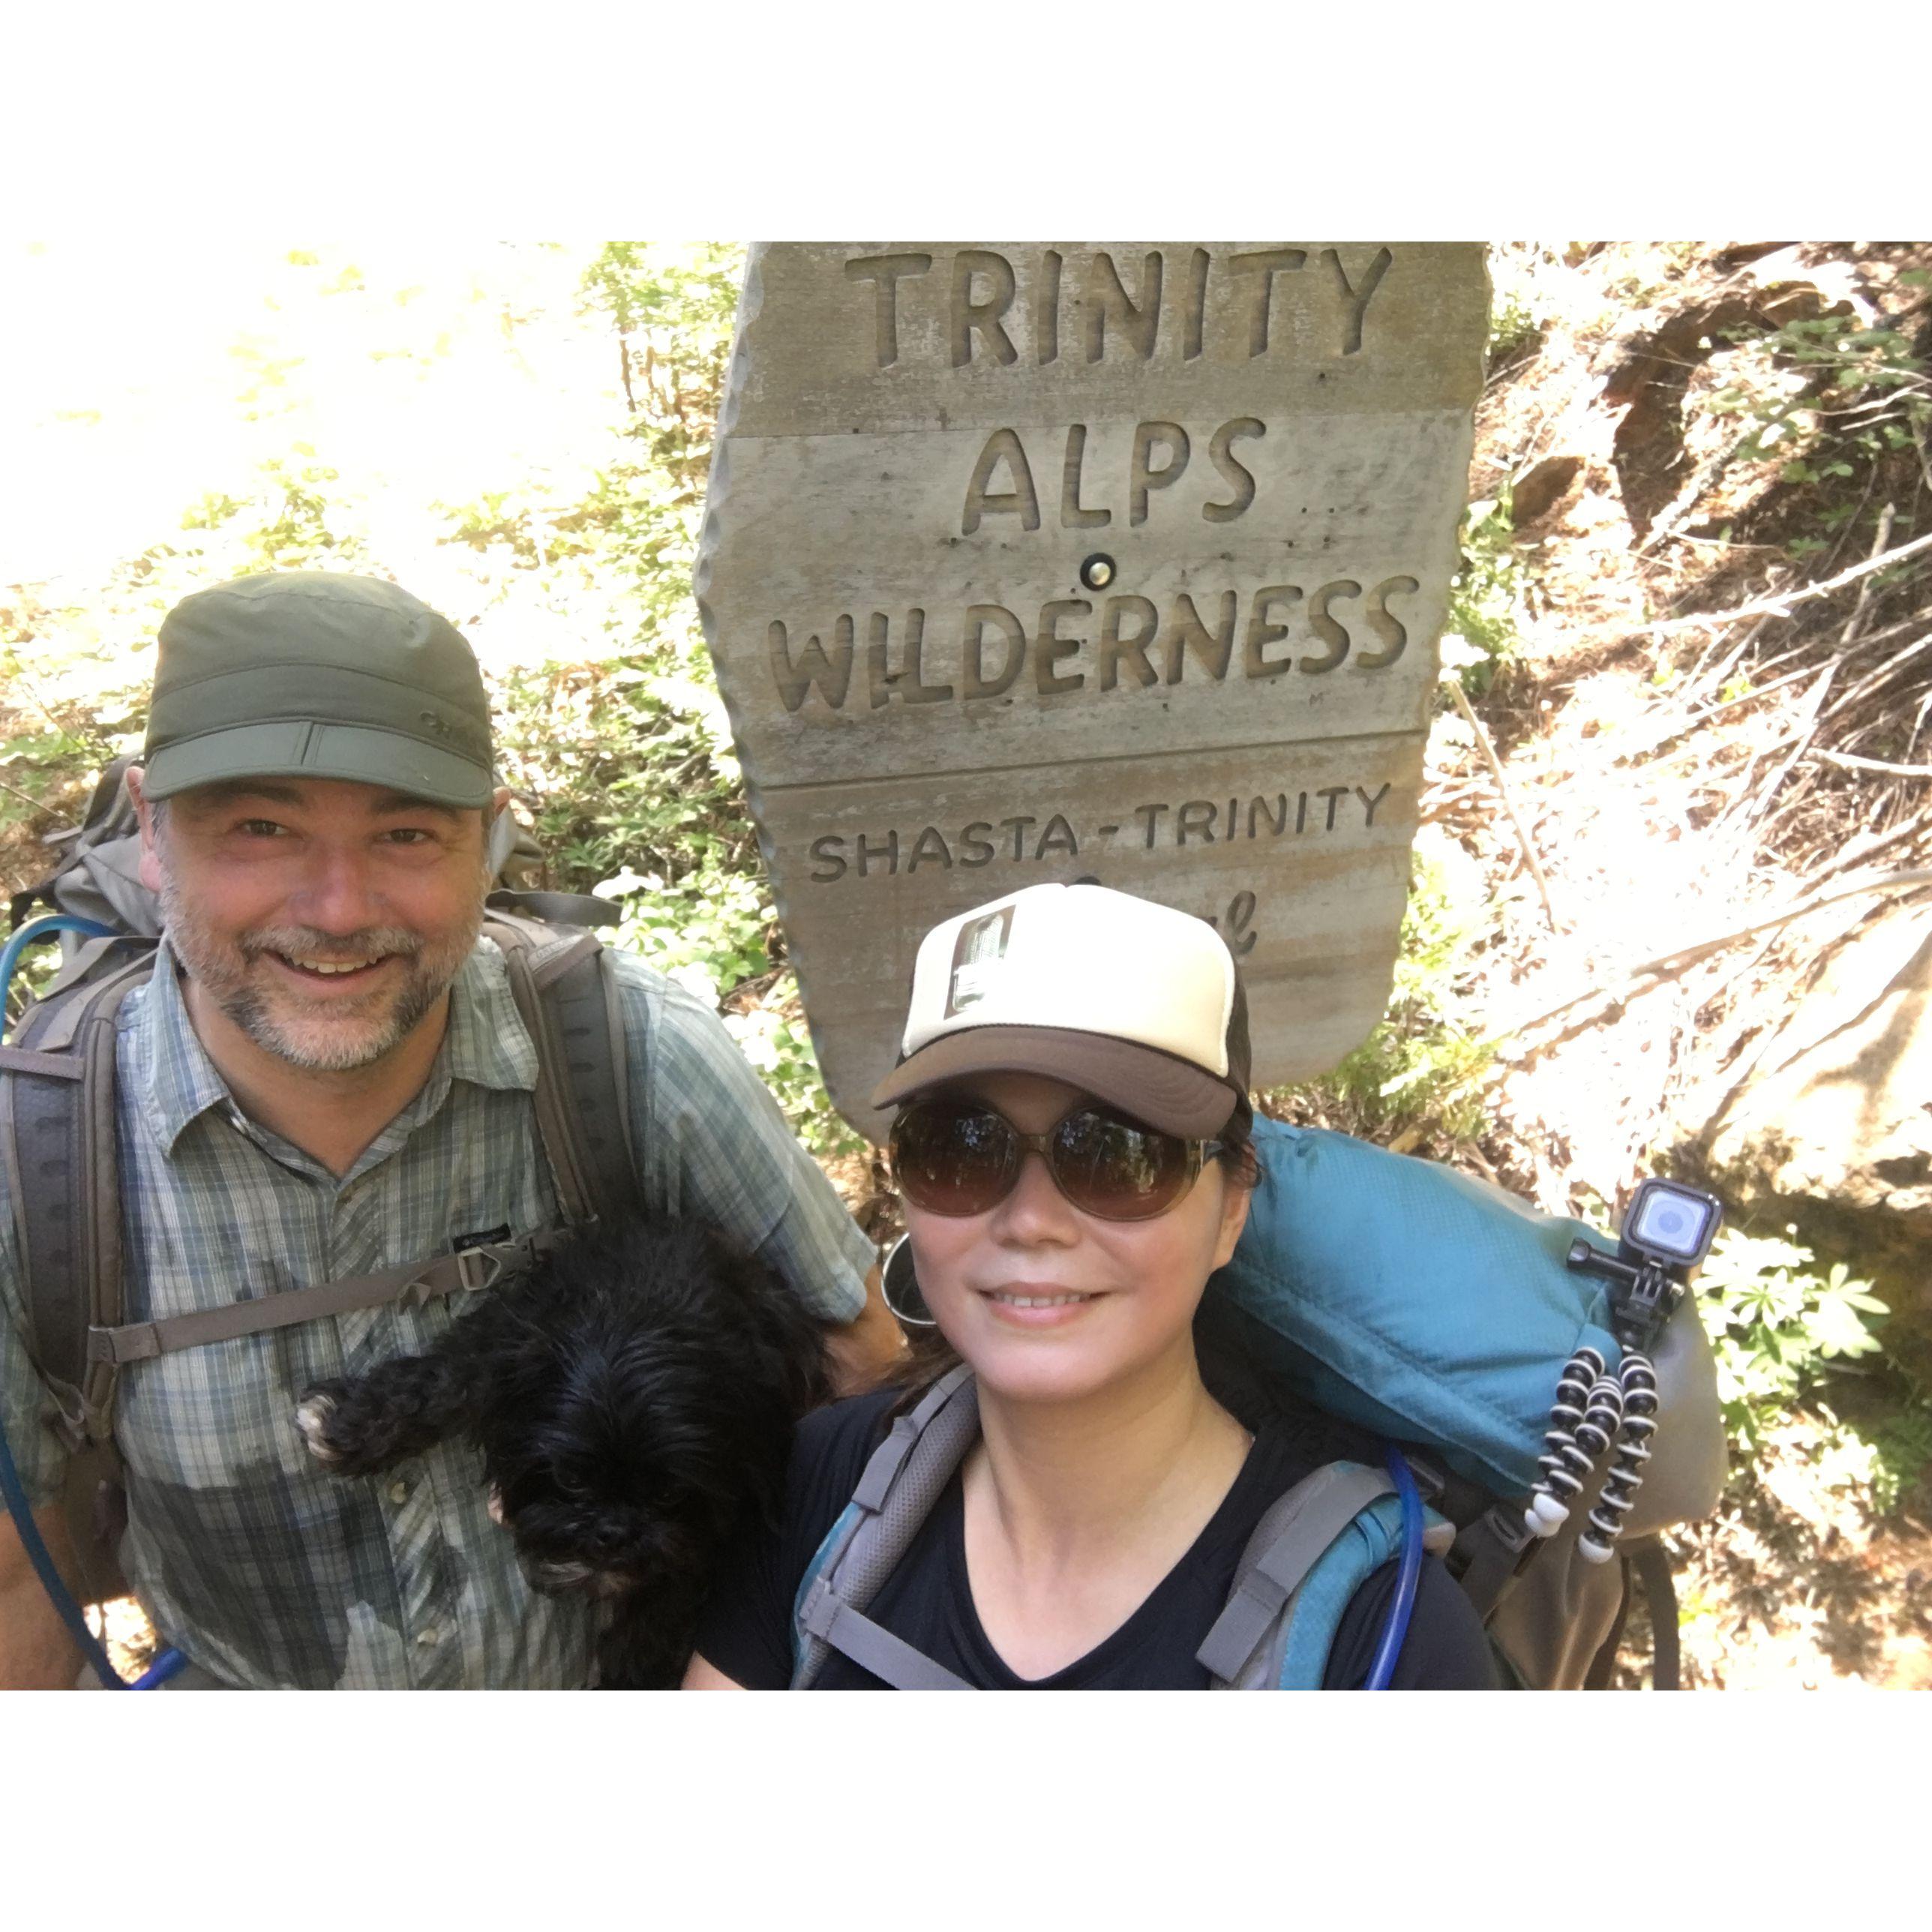 Vicky first backpacking trip in Shasta-Trinity National Forest 2017. Her backpack was 45 lbs.